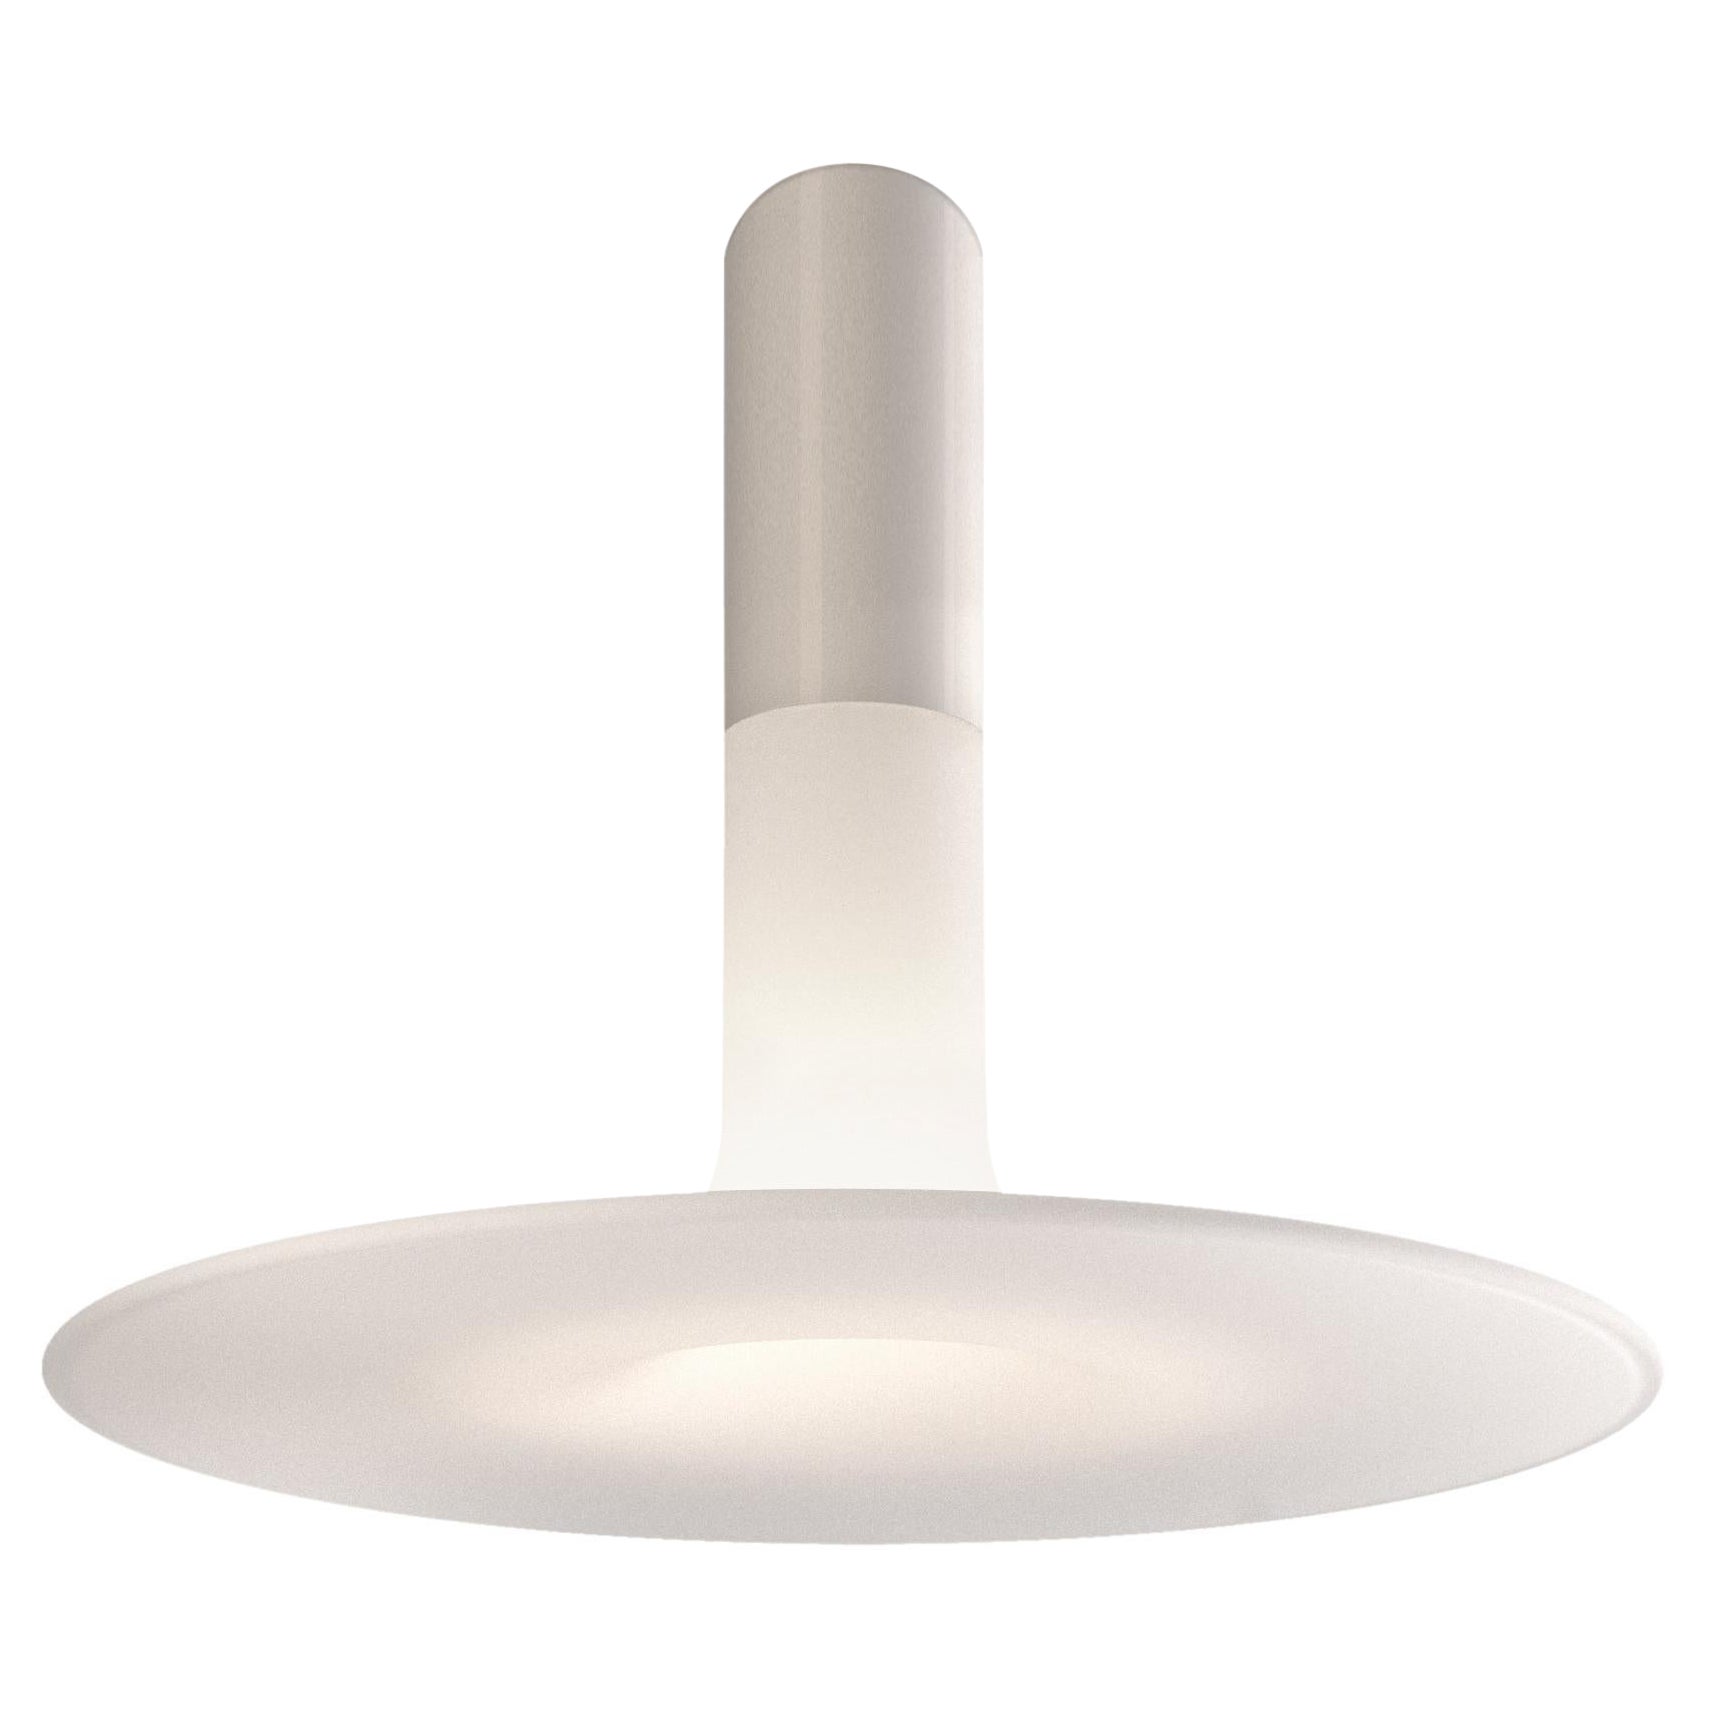 'Louis 48' Ceiling Lamp by Studio 14 for KDLN For Sale